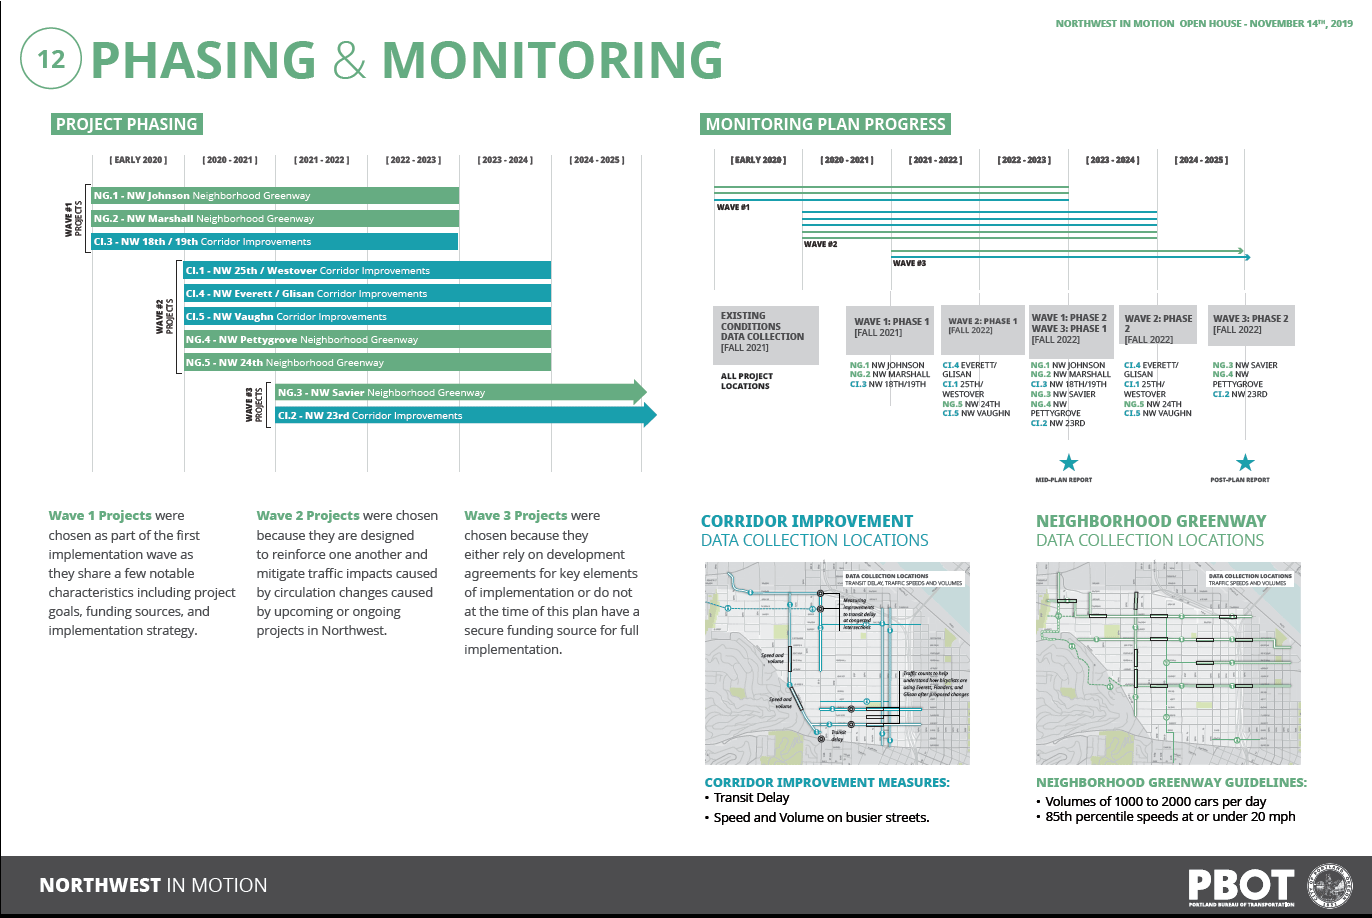 Board shows: A diagram shows the schedule for monitoring plan progress, with existing condistions data collection taking place in the fall of 2021 at all project locations. Waves 1, 2 and 3 data collection would take place from fall 2021 through fall 2022. A diagram shows how the implementation phasing for the top 10 projects is recommended. The first wave of projects includes the Johnson Neighborhood Greenway, Marshall Neighborhood Greenway, and 18th/19th Corridor improvements. Wave 2 includes 25th/Westover Corridor improvements, Everett/Glisan corridor improvements, Vaughn corridor improvements, Pettygrove neighborhood greenway, and 24th neighborhood greenway. Wave 3 includes Savier neighborhood greenway and NW 23rd corridor improvements. A map shows the location of where data collection would take place throughout the northwest project area.